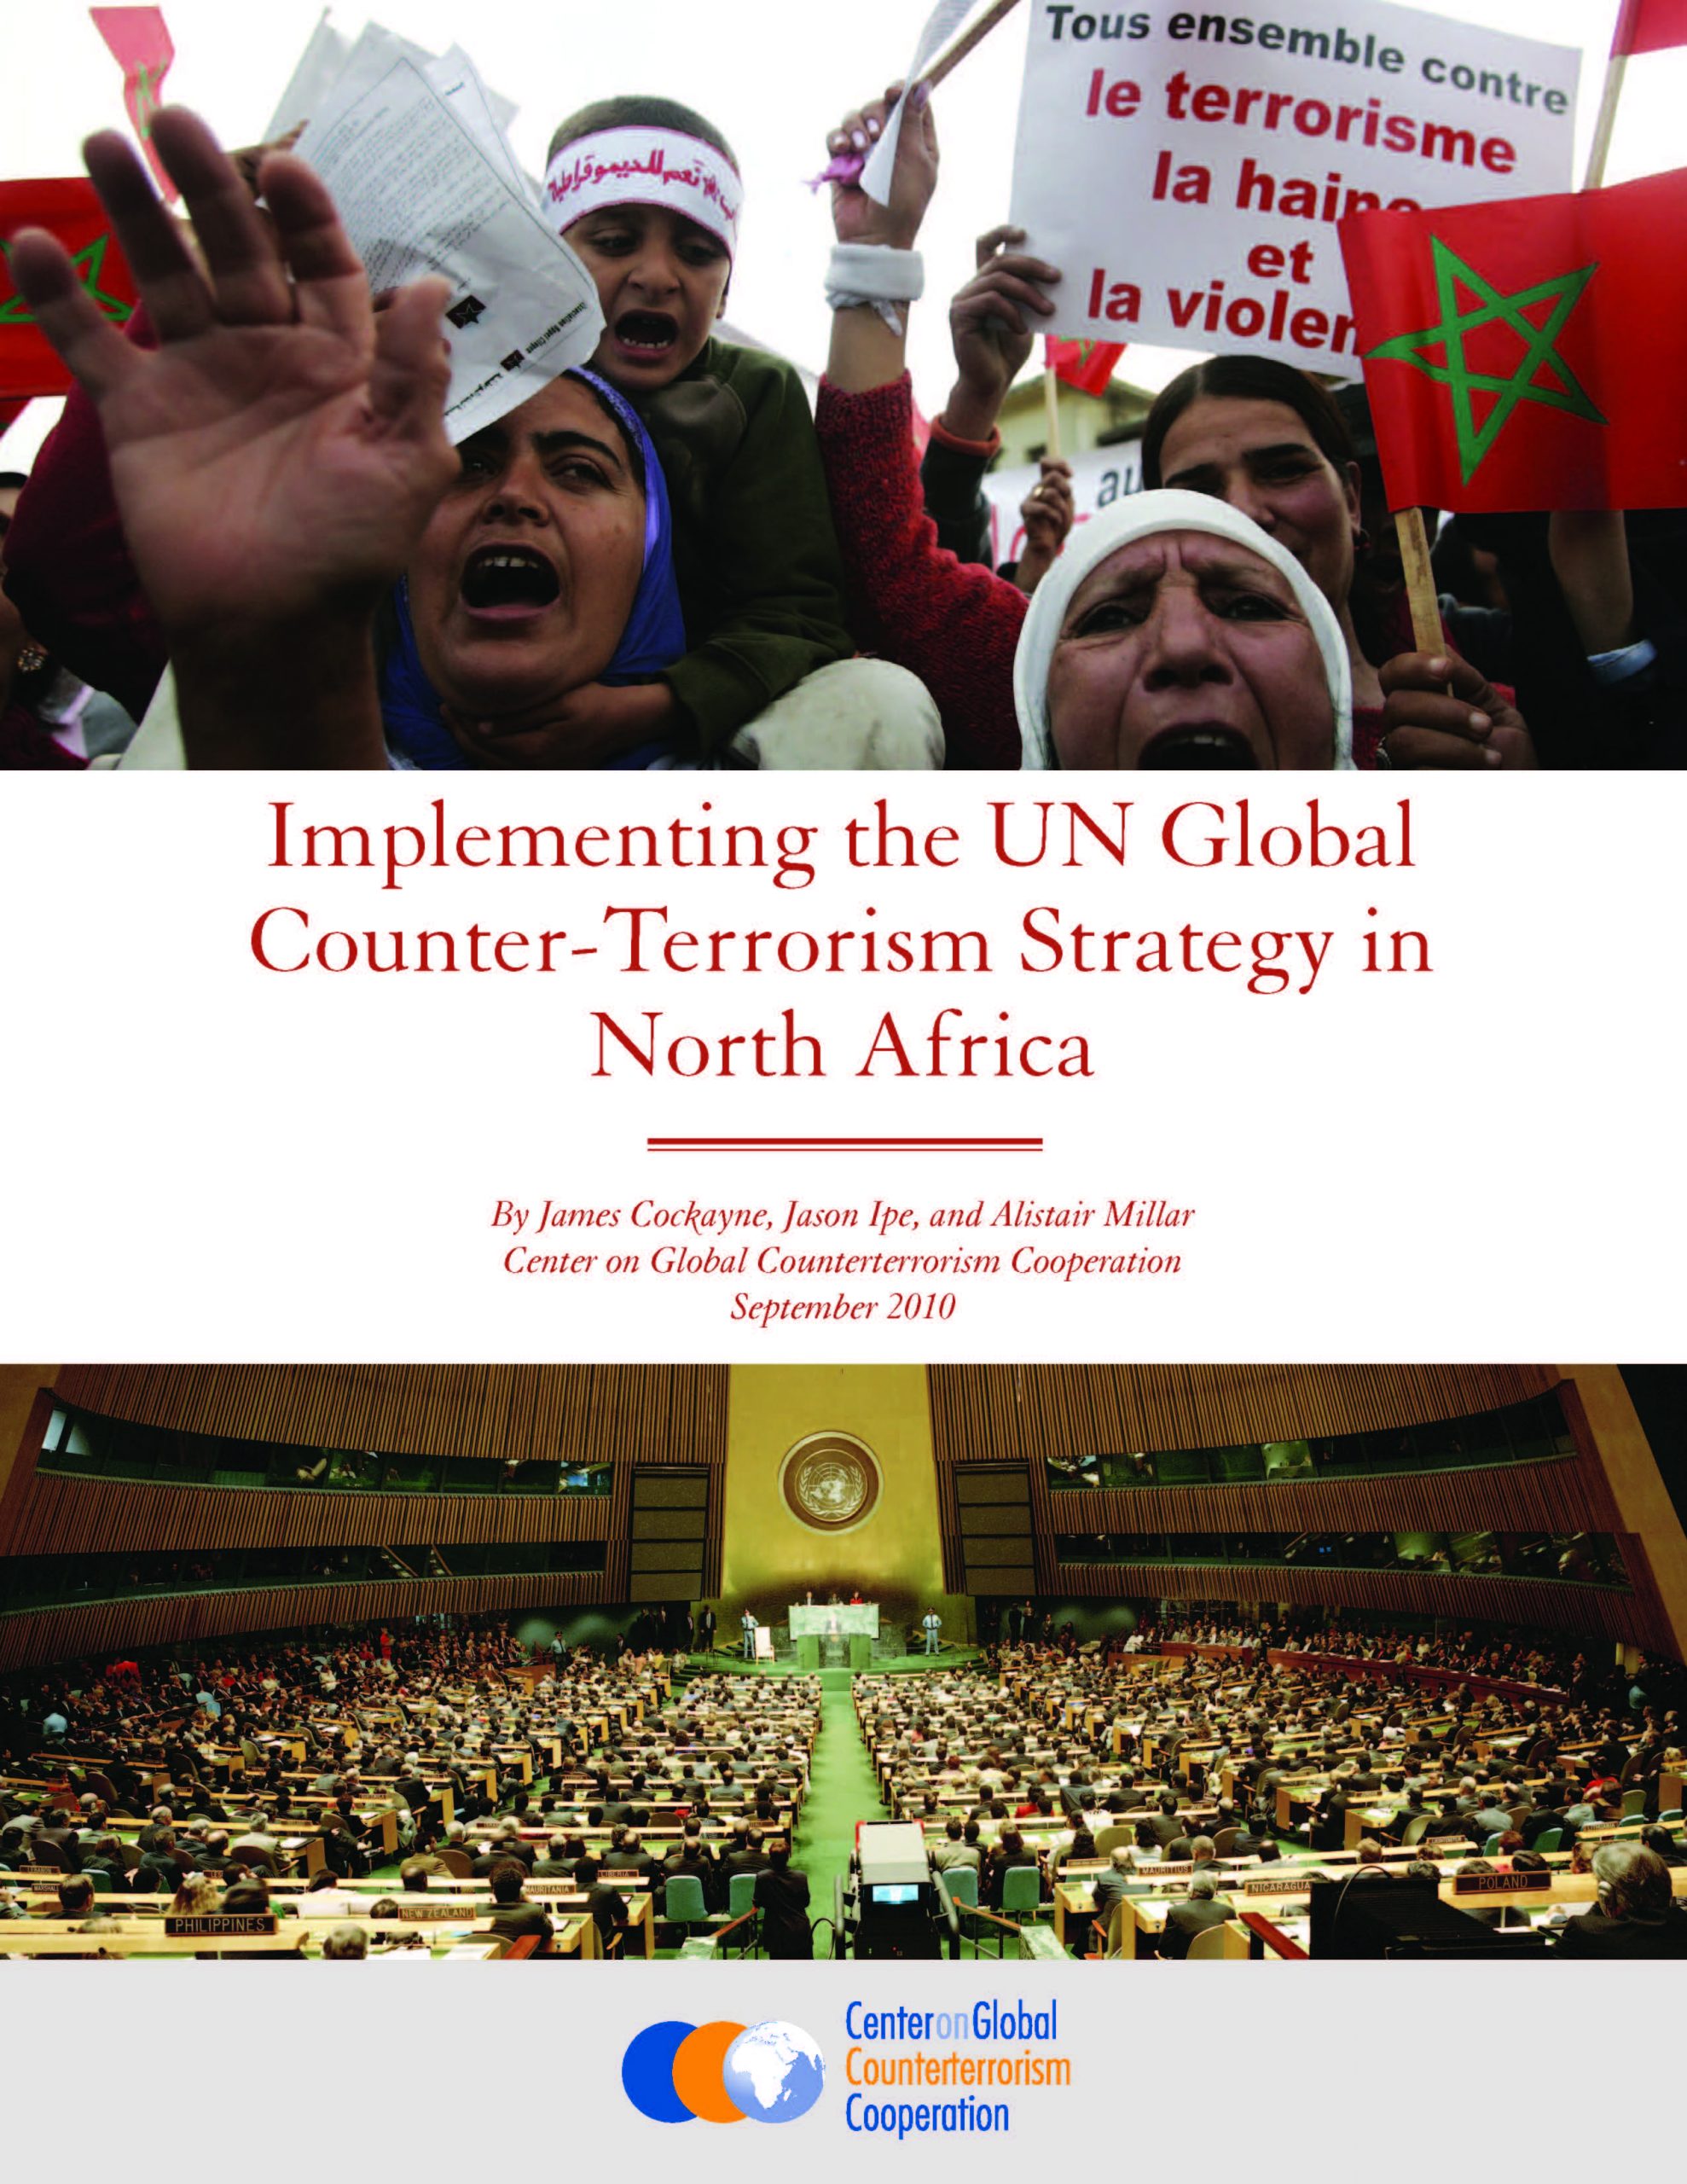 Implementing the UN Global Counter-Terrorism Strategy in North Africa